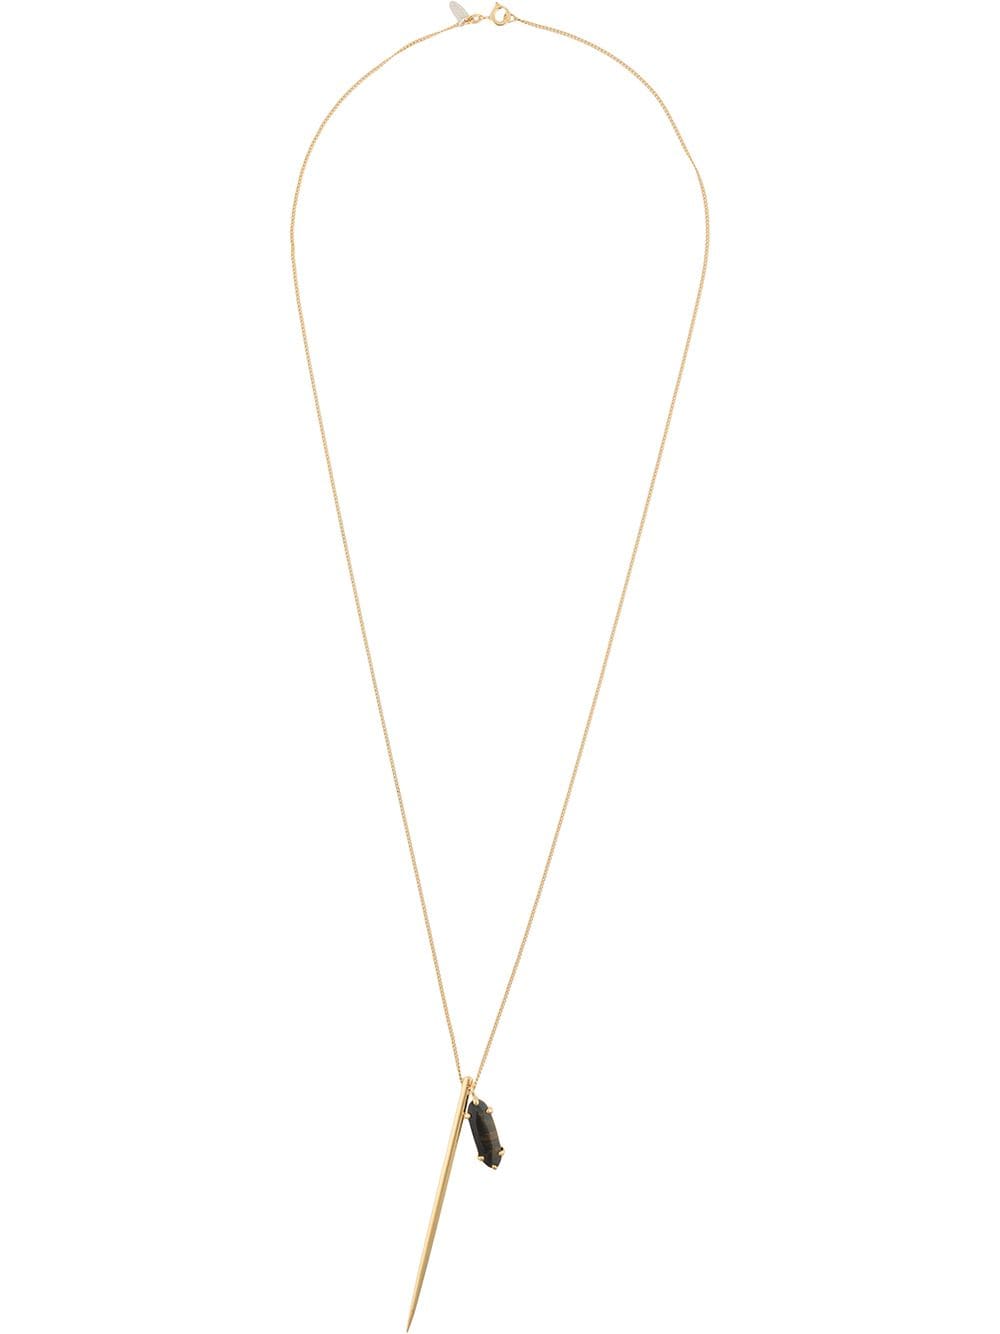 Wouters & Hendrix Midnight Children pin necklace - Gold von Wouters & Hendrix